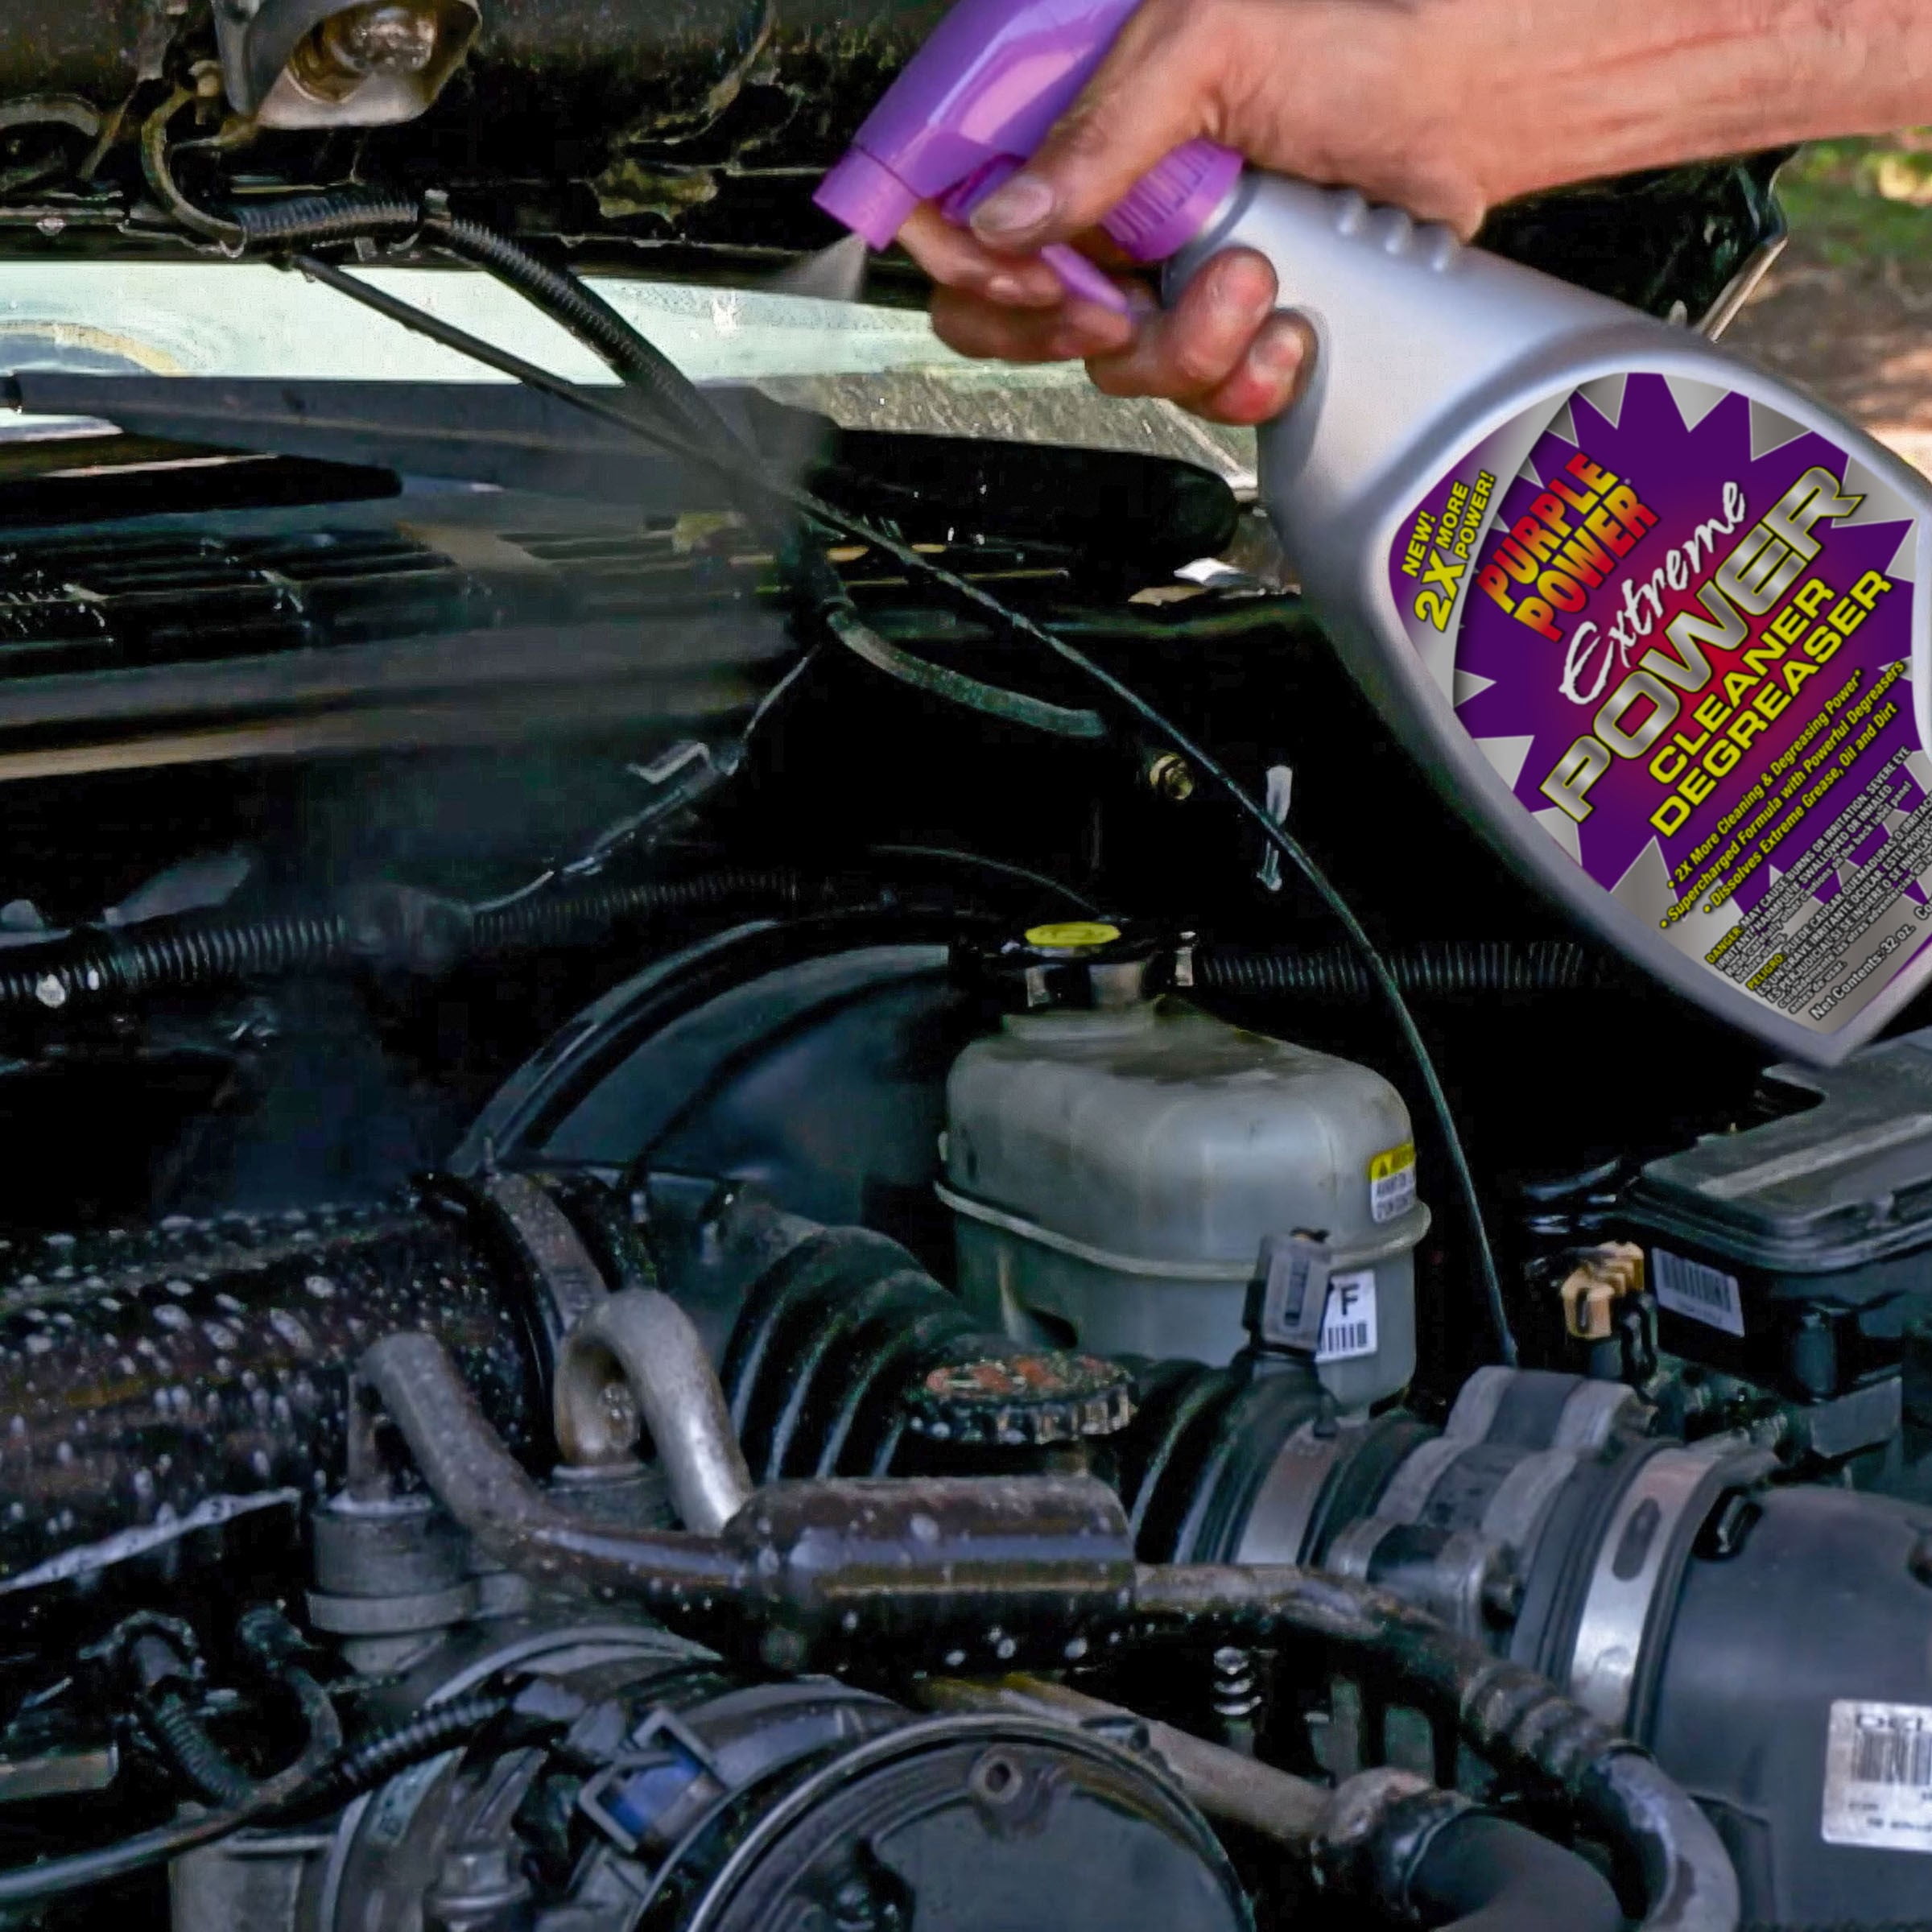 Purple Power Extreme Power Cleaner & Degreaser, Gallon, 2218137